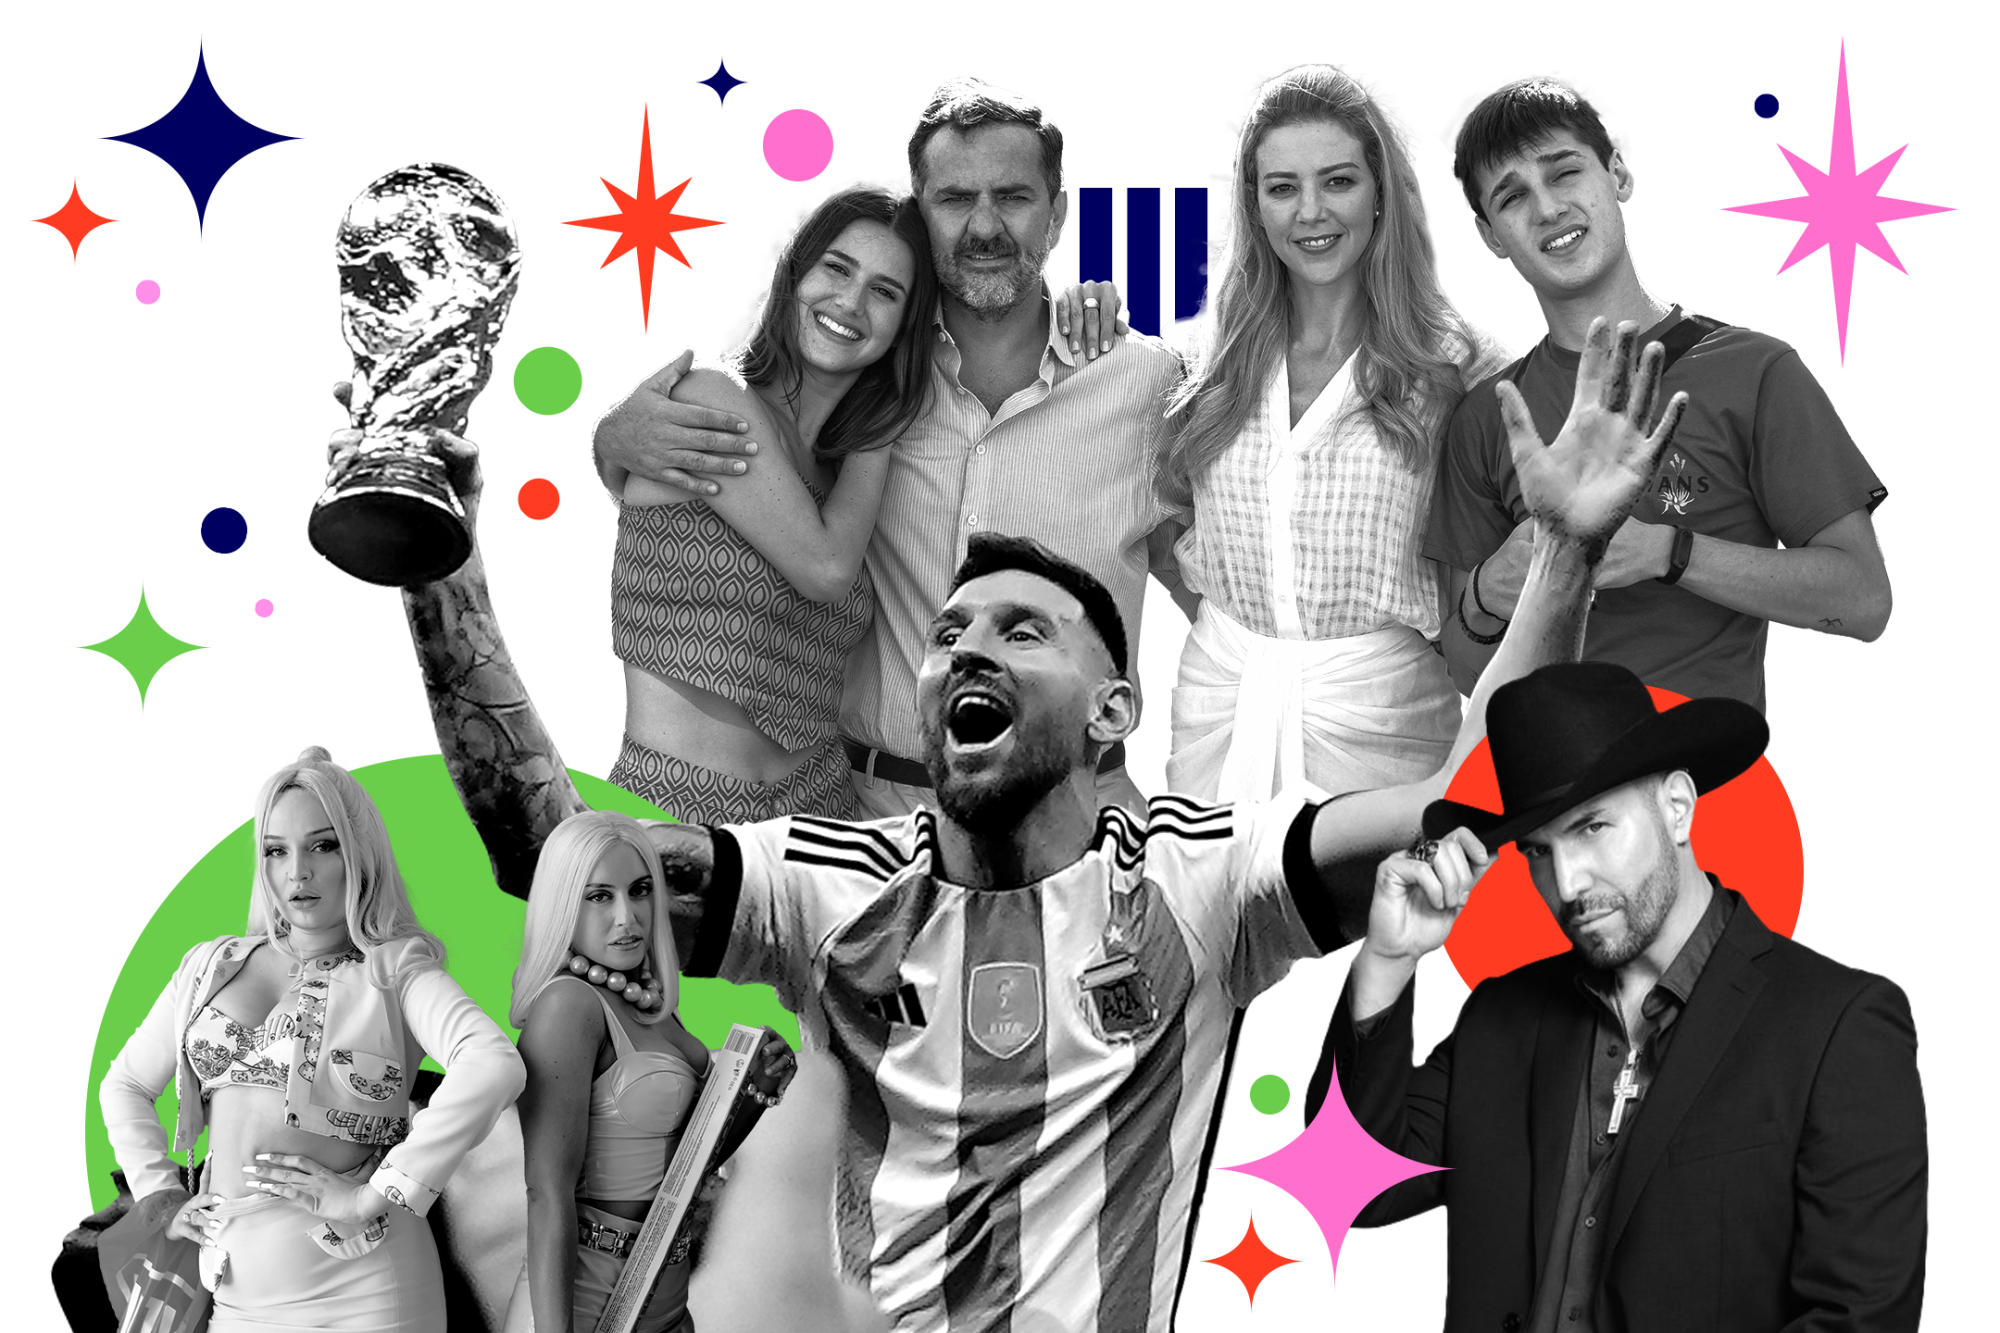 A collage of several Spanish-language TV stars and Argentine football player Lionel Messi